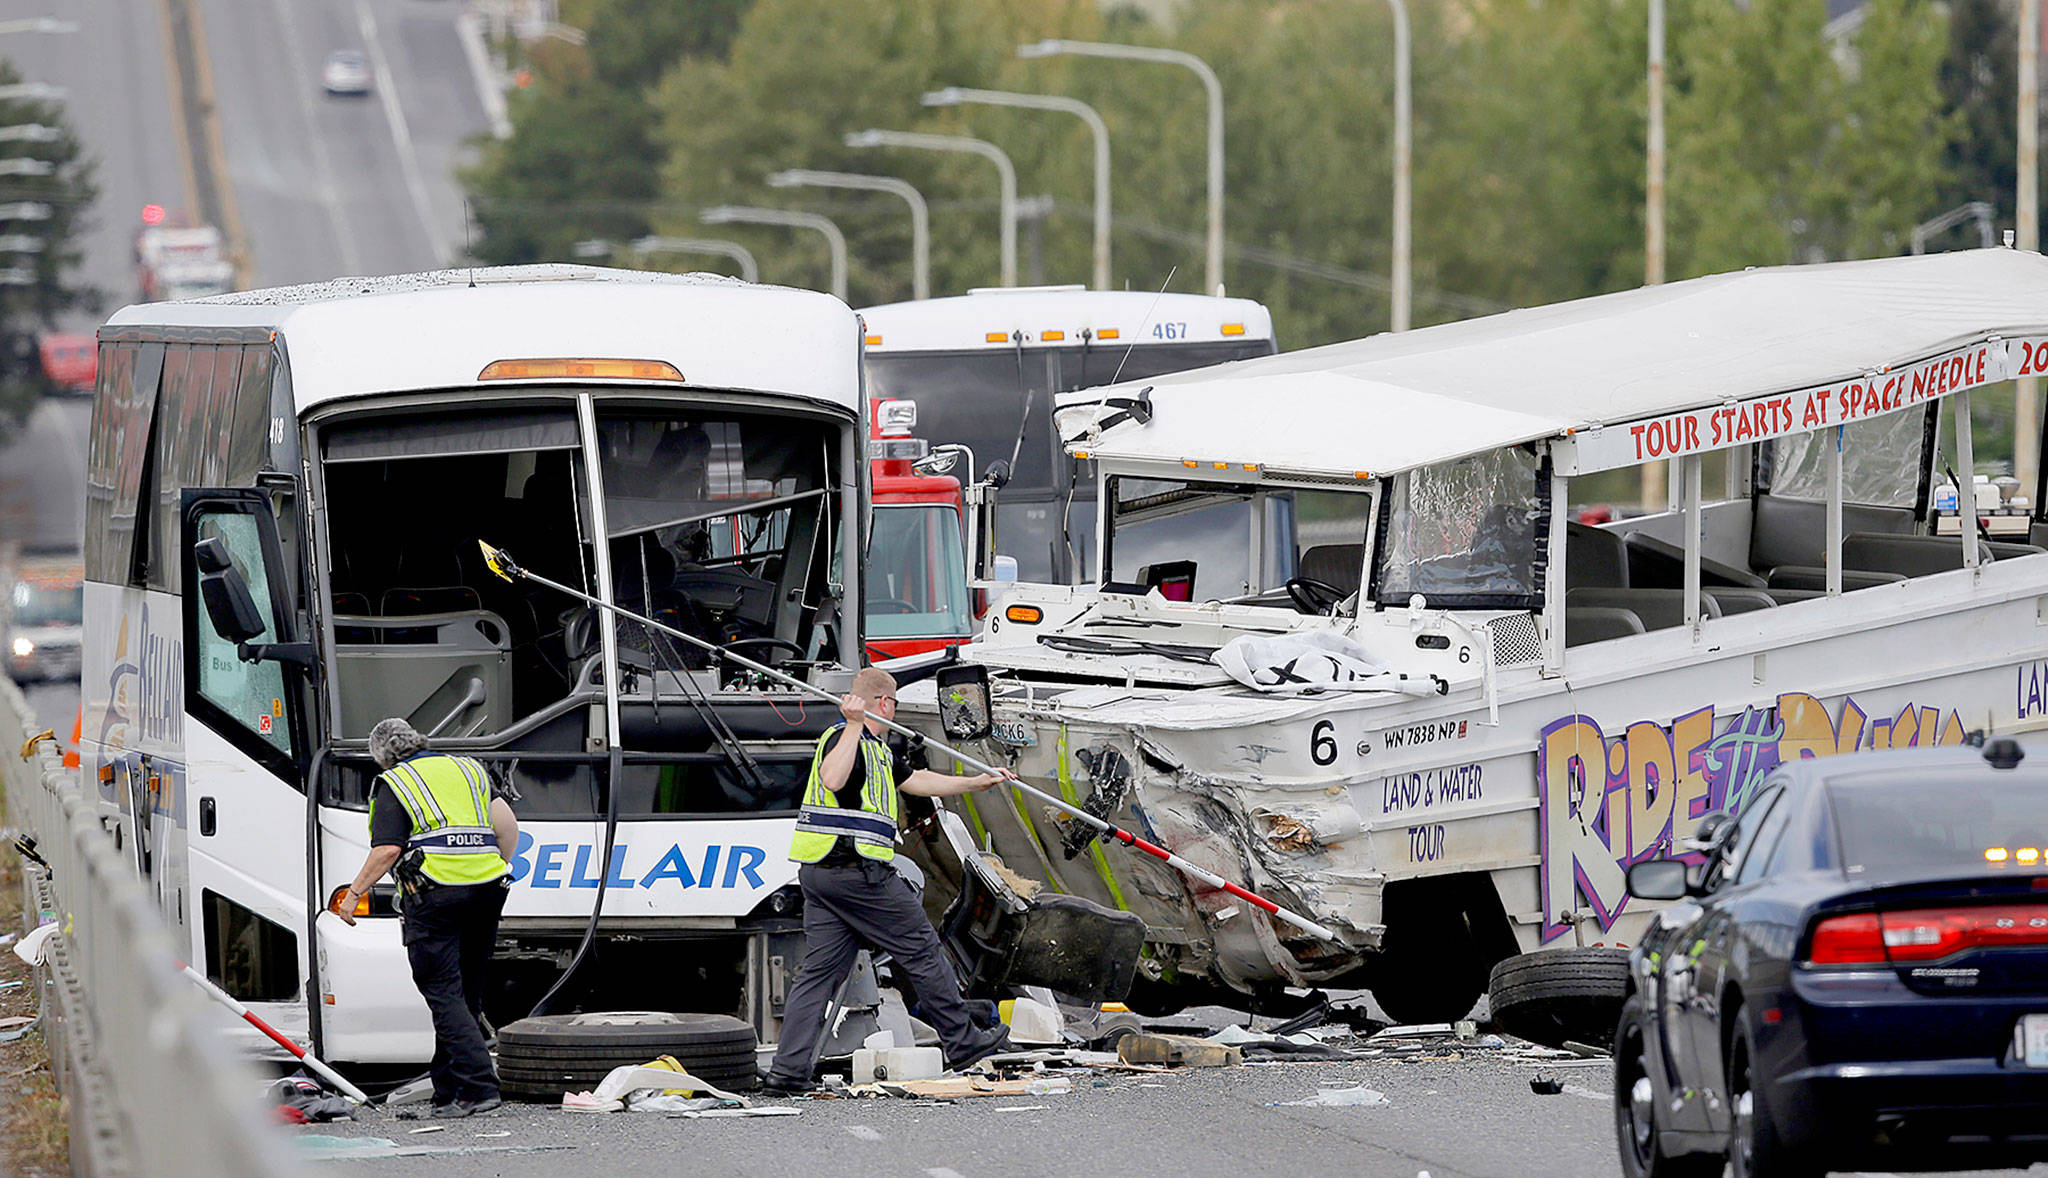 Seattle police work at the scene of a crash involving a “Ride the Ducks” amphibious, military-style tour vehicle (right) and a charter passenger bus that killed five people in 2015. (AP Photo/Ted S. Warren, File)